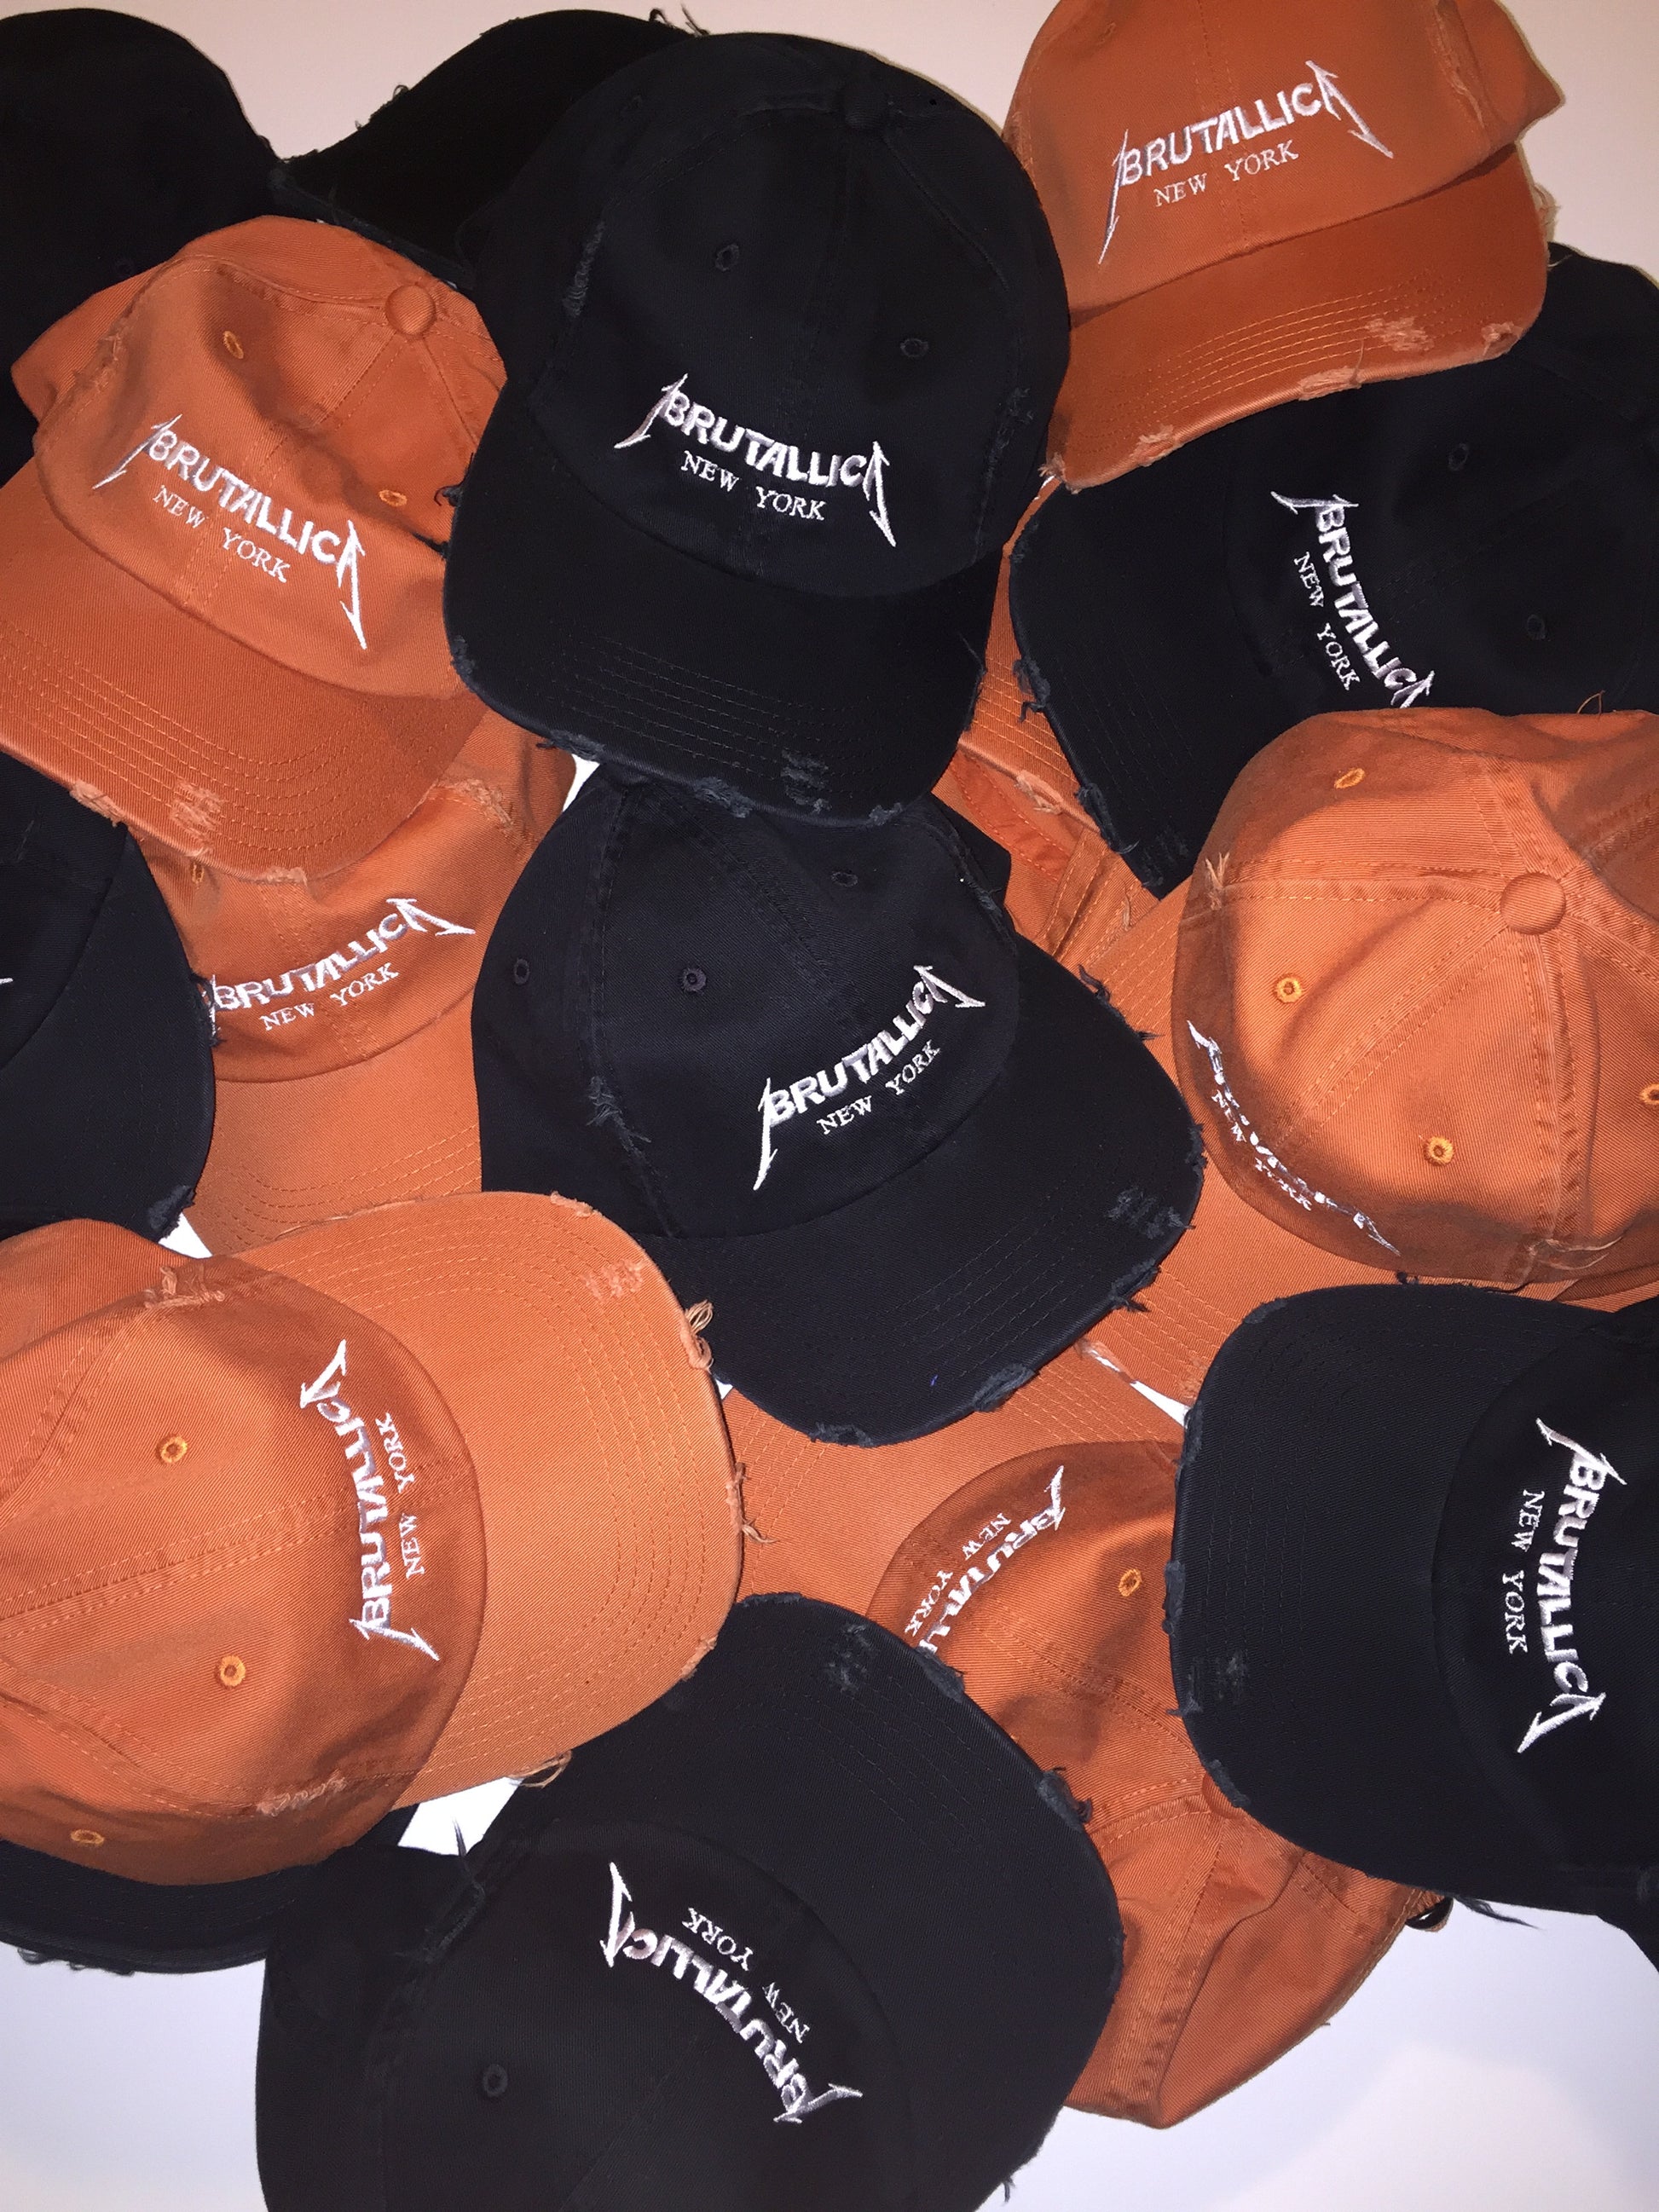 Brutallica distressed dad hats in black and burnt orange colorways with white embroidered logo pile of hats